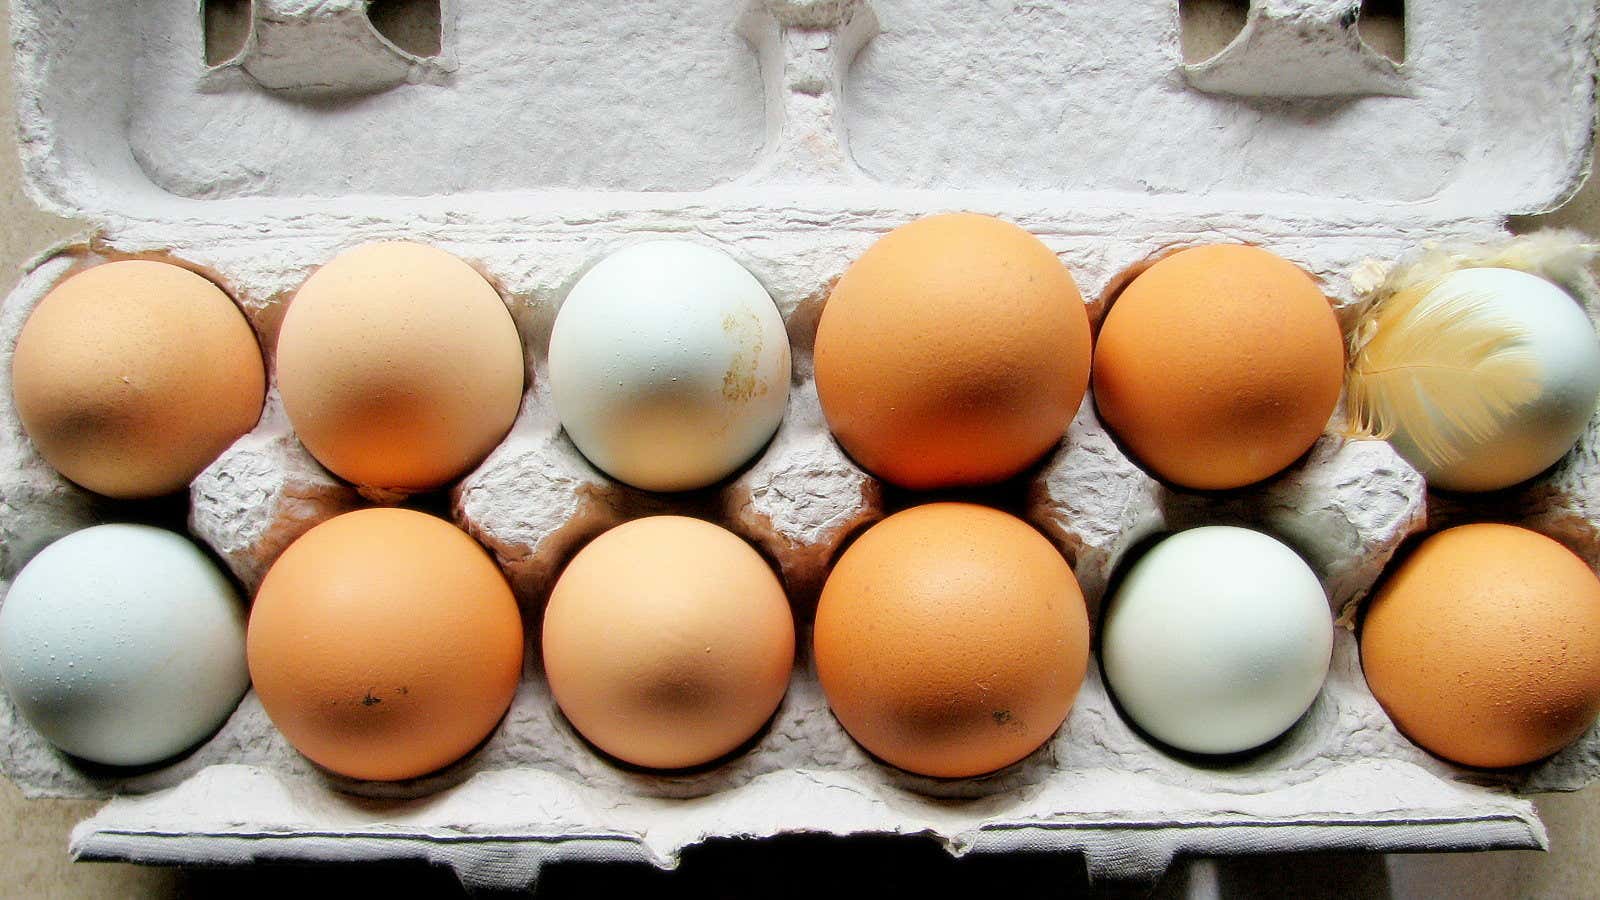 Brown or white: An egg-sistential question.